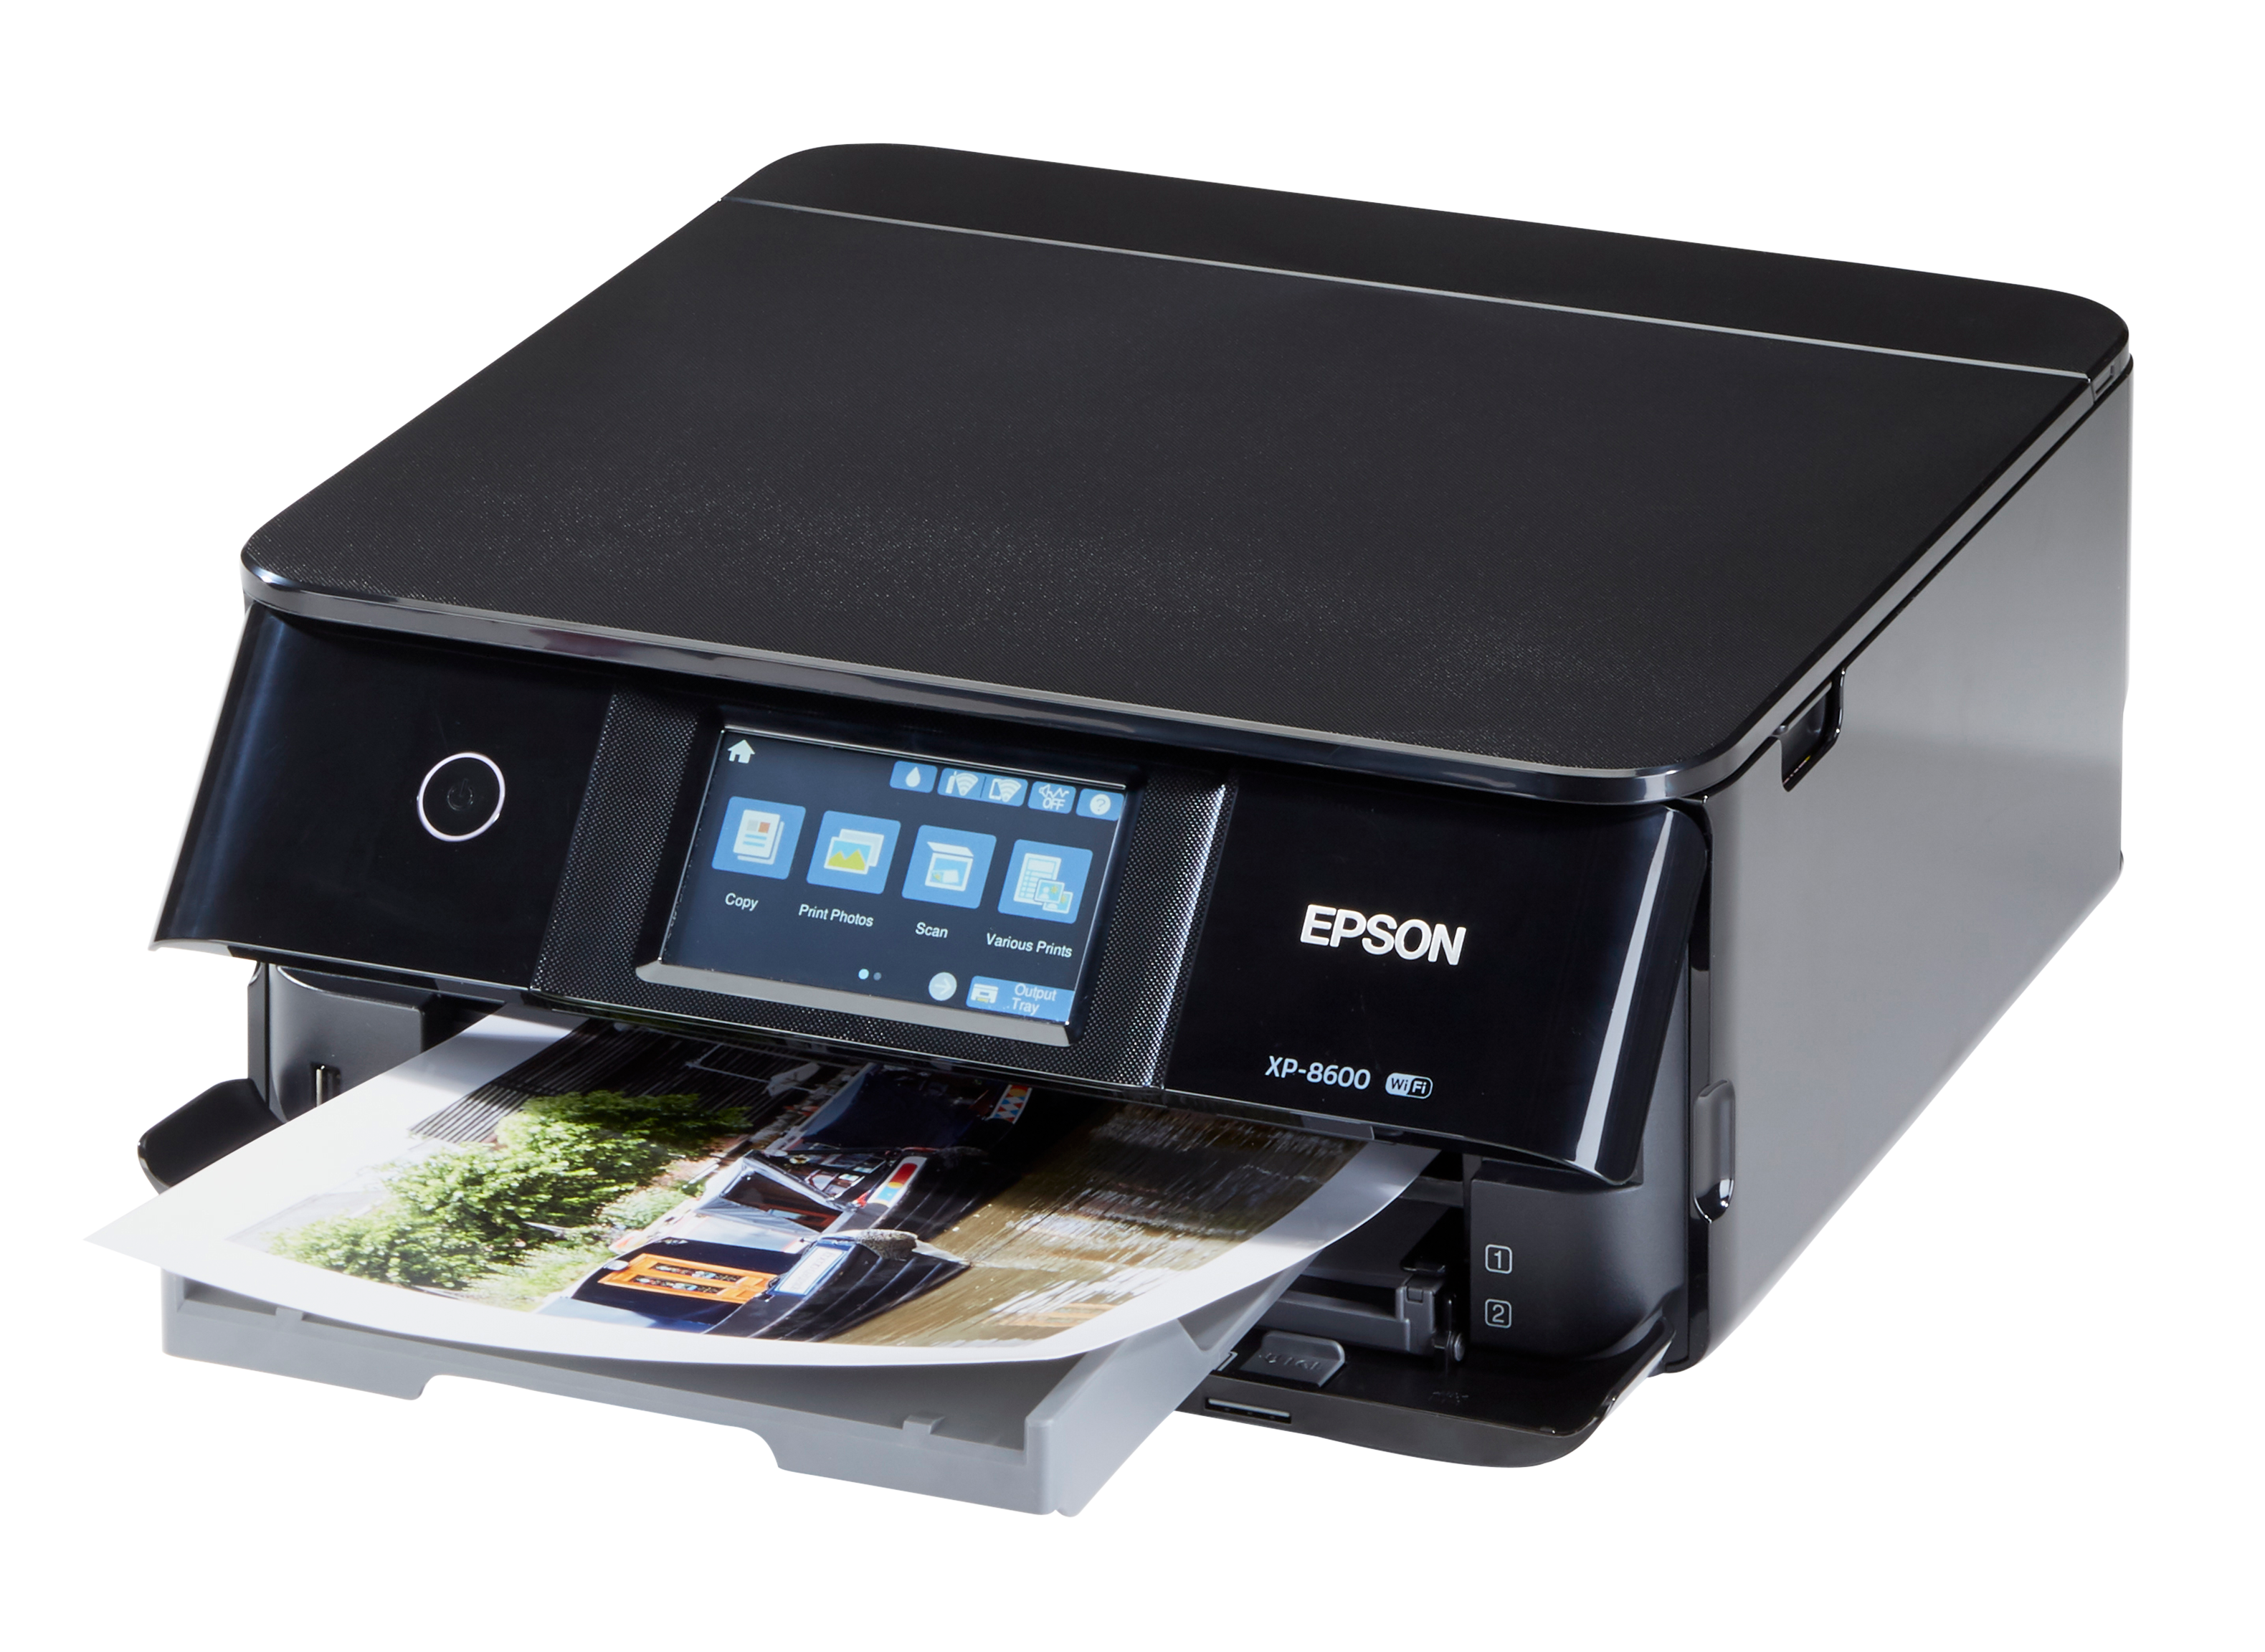 bekymring Den aktuelle Udfordring Epson Expression Photo XP-8600 Printer Review - Consumer Reports